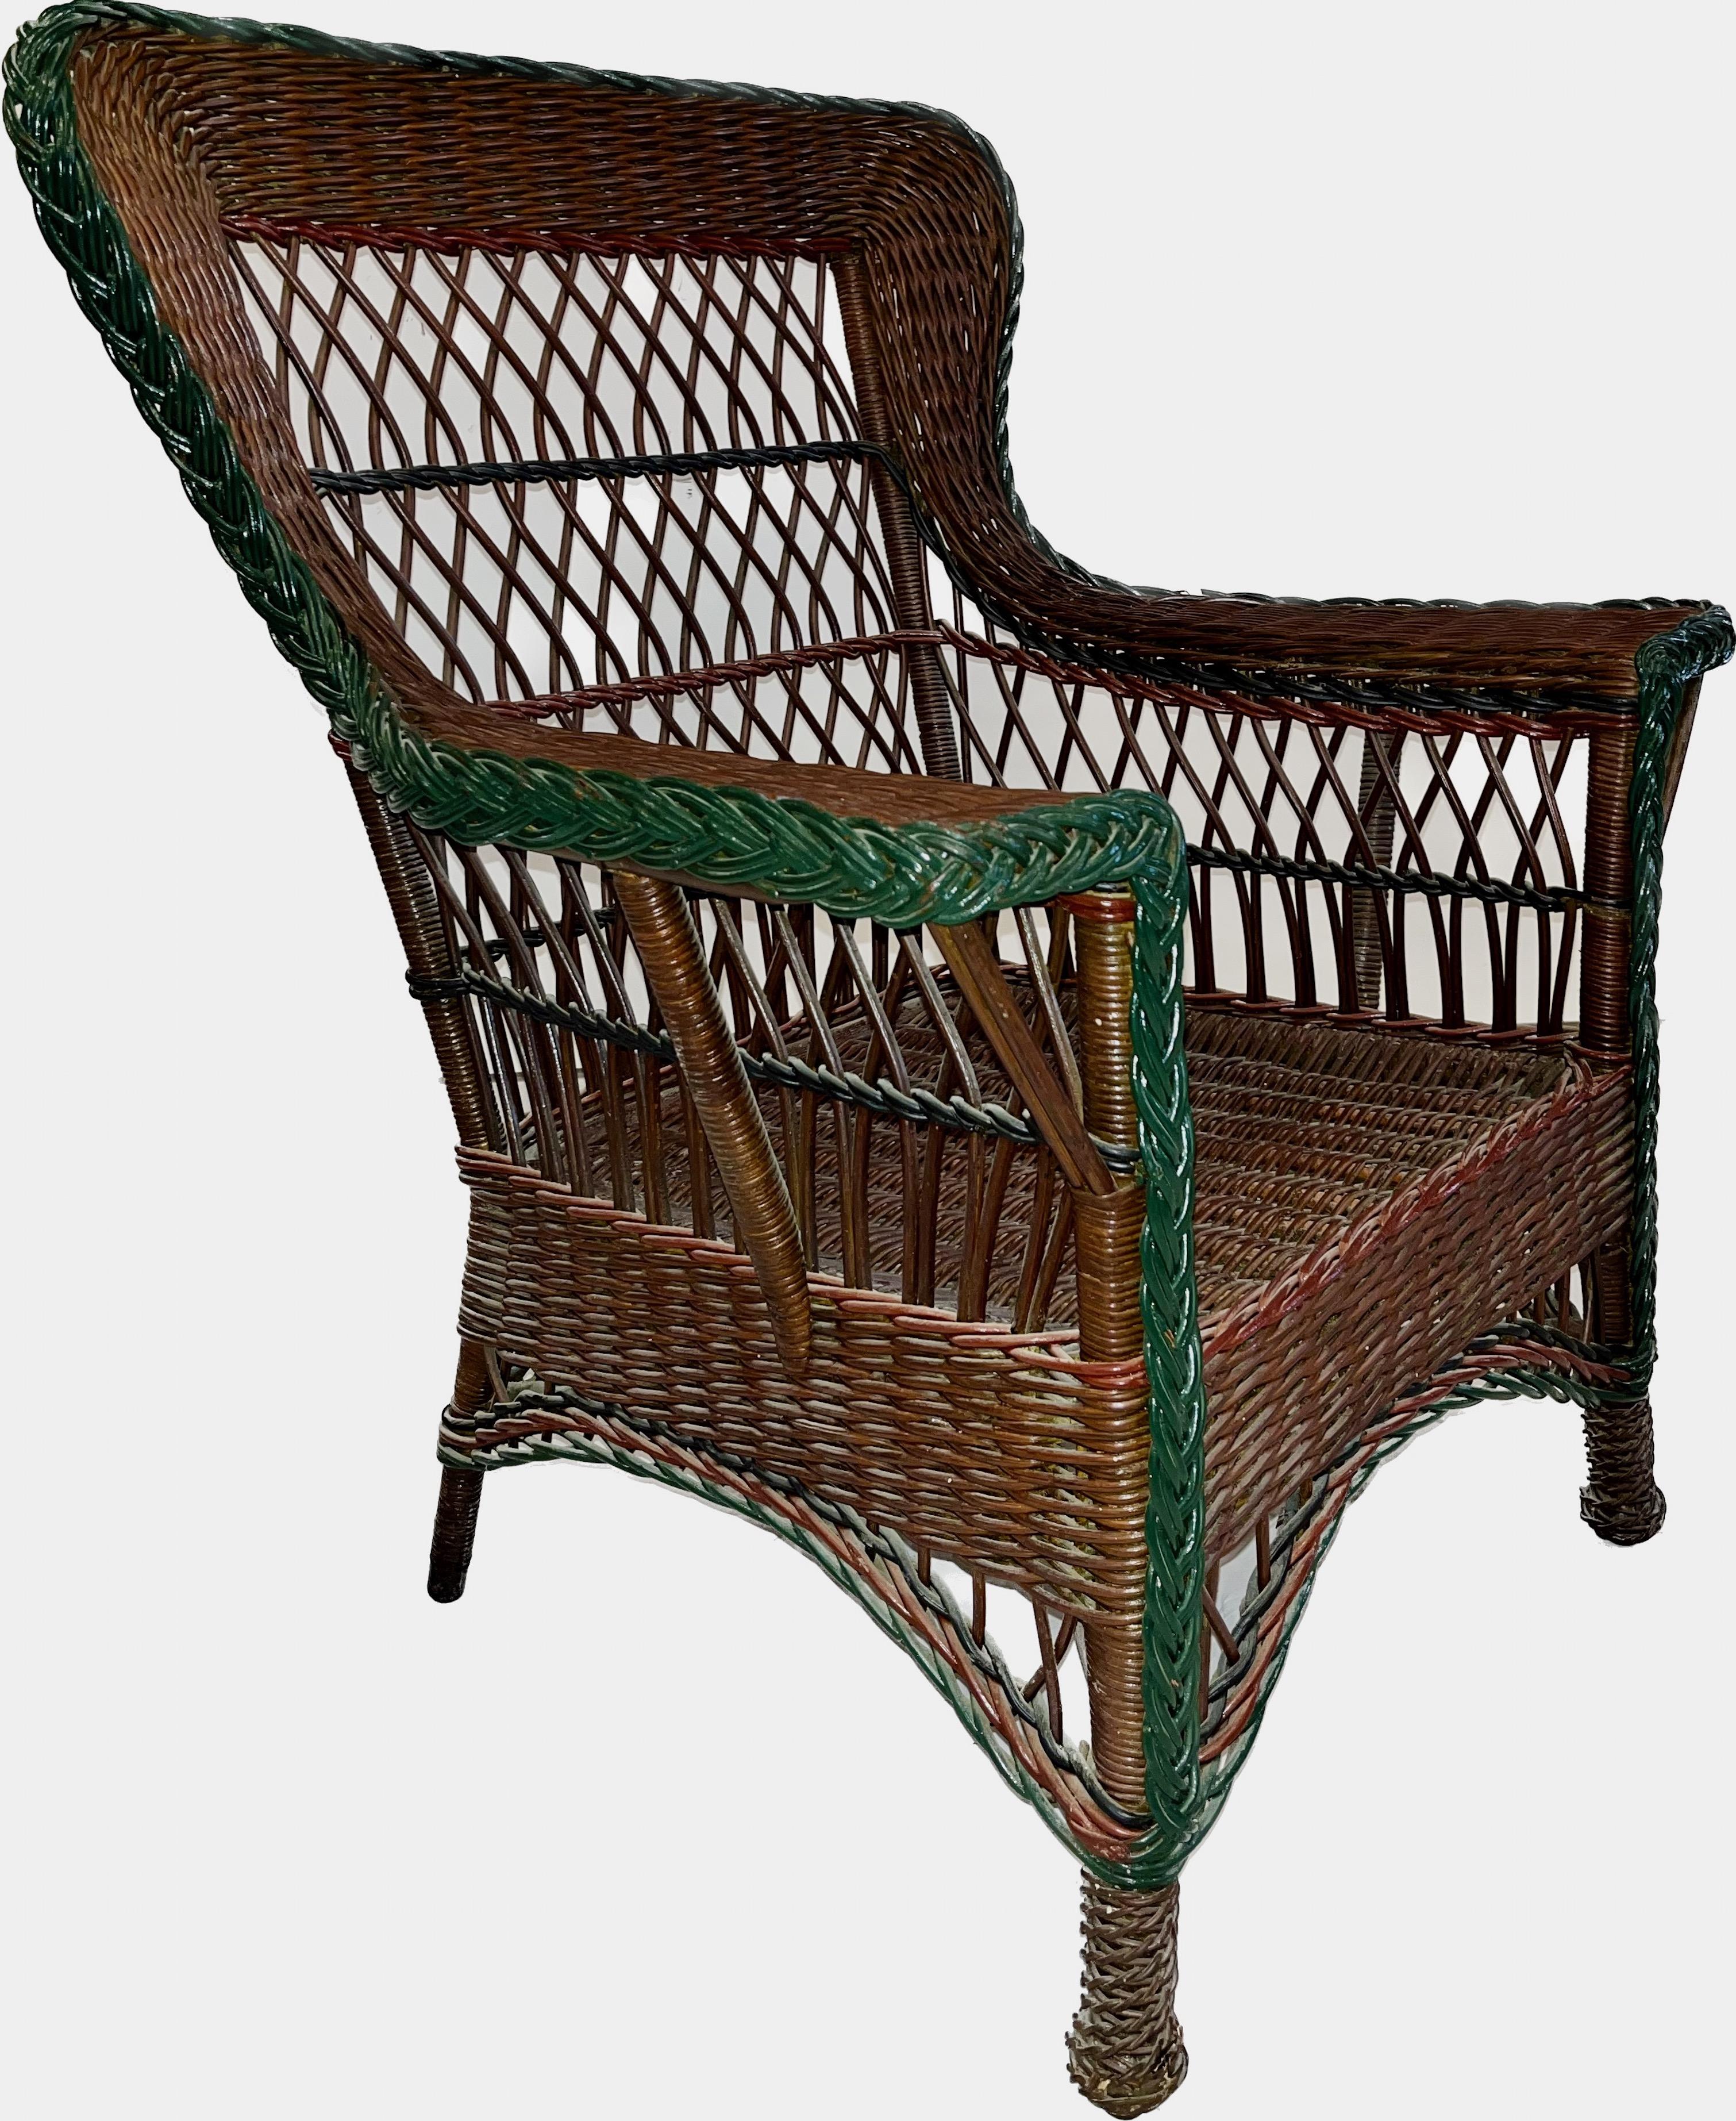 Antique Bar Harbor Style Wicker Wing Chair in Natural Finish with Green Trim 3